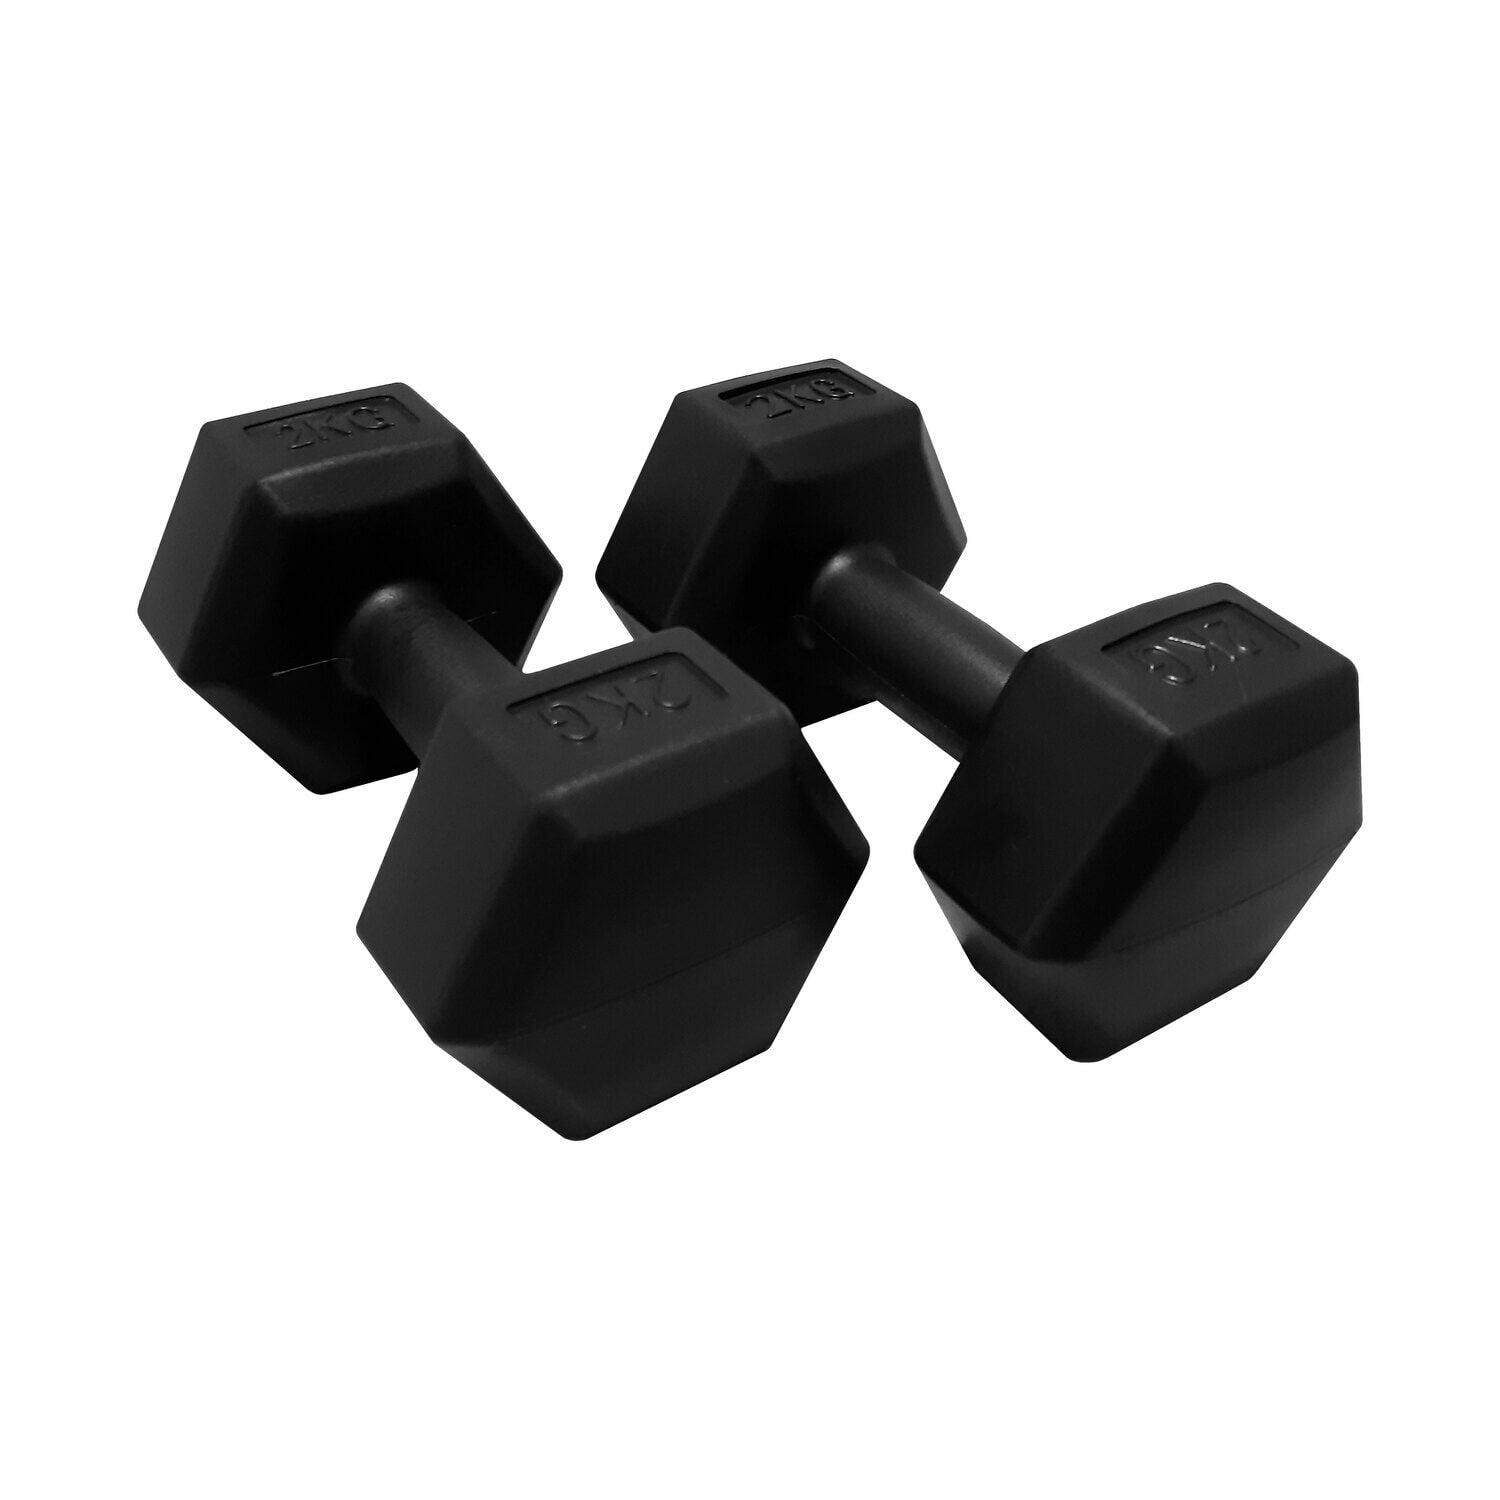 HXGN 12kg Hex Dumbbell Weight Set 3/4